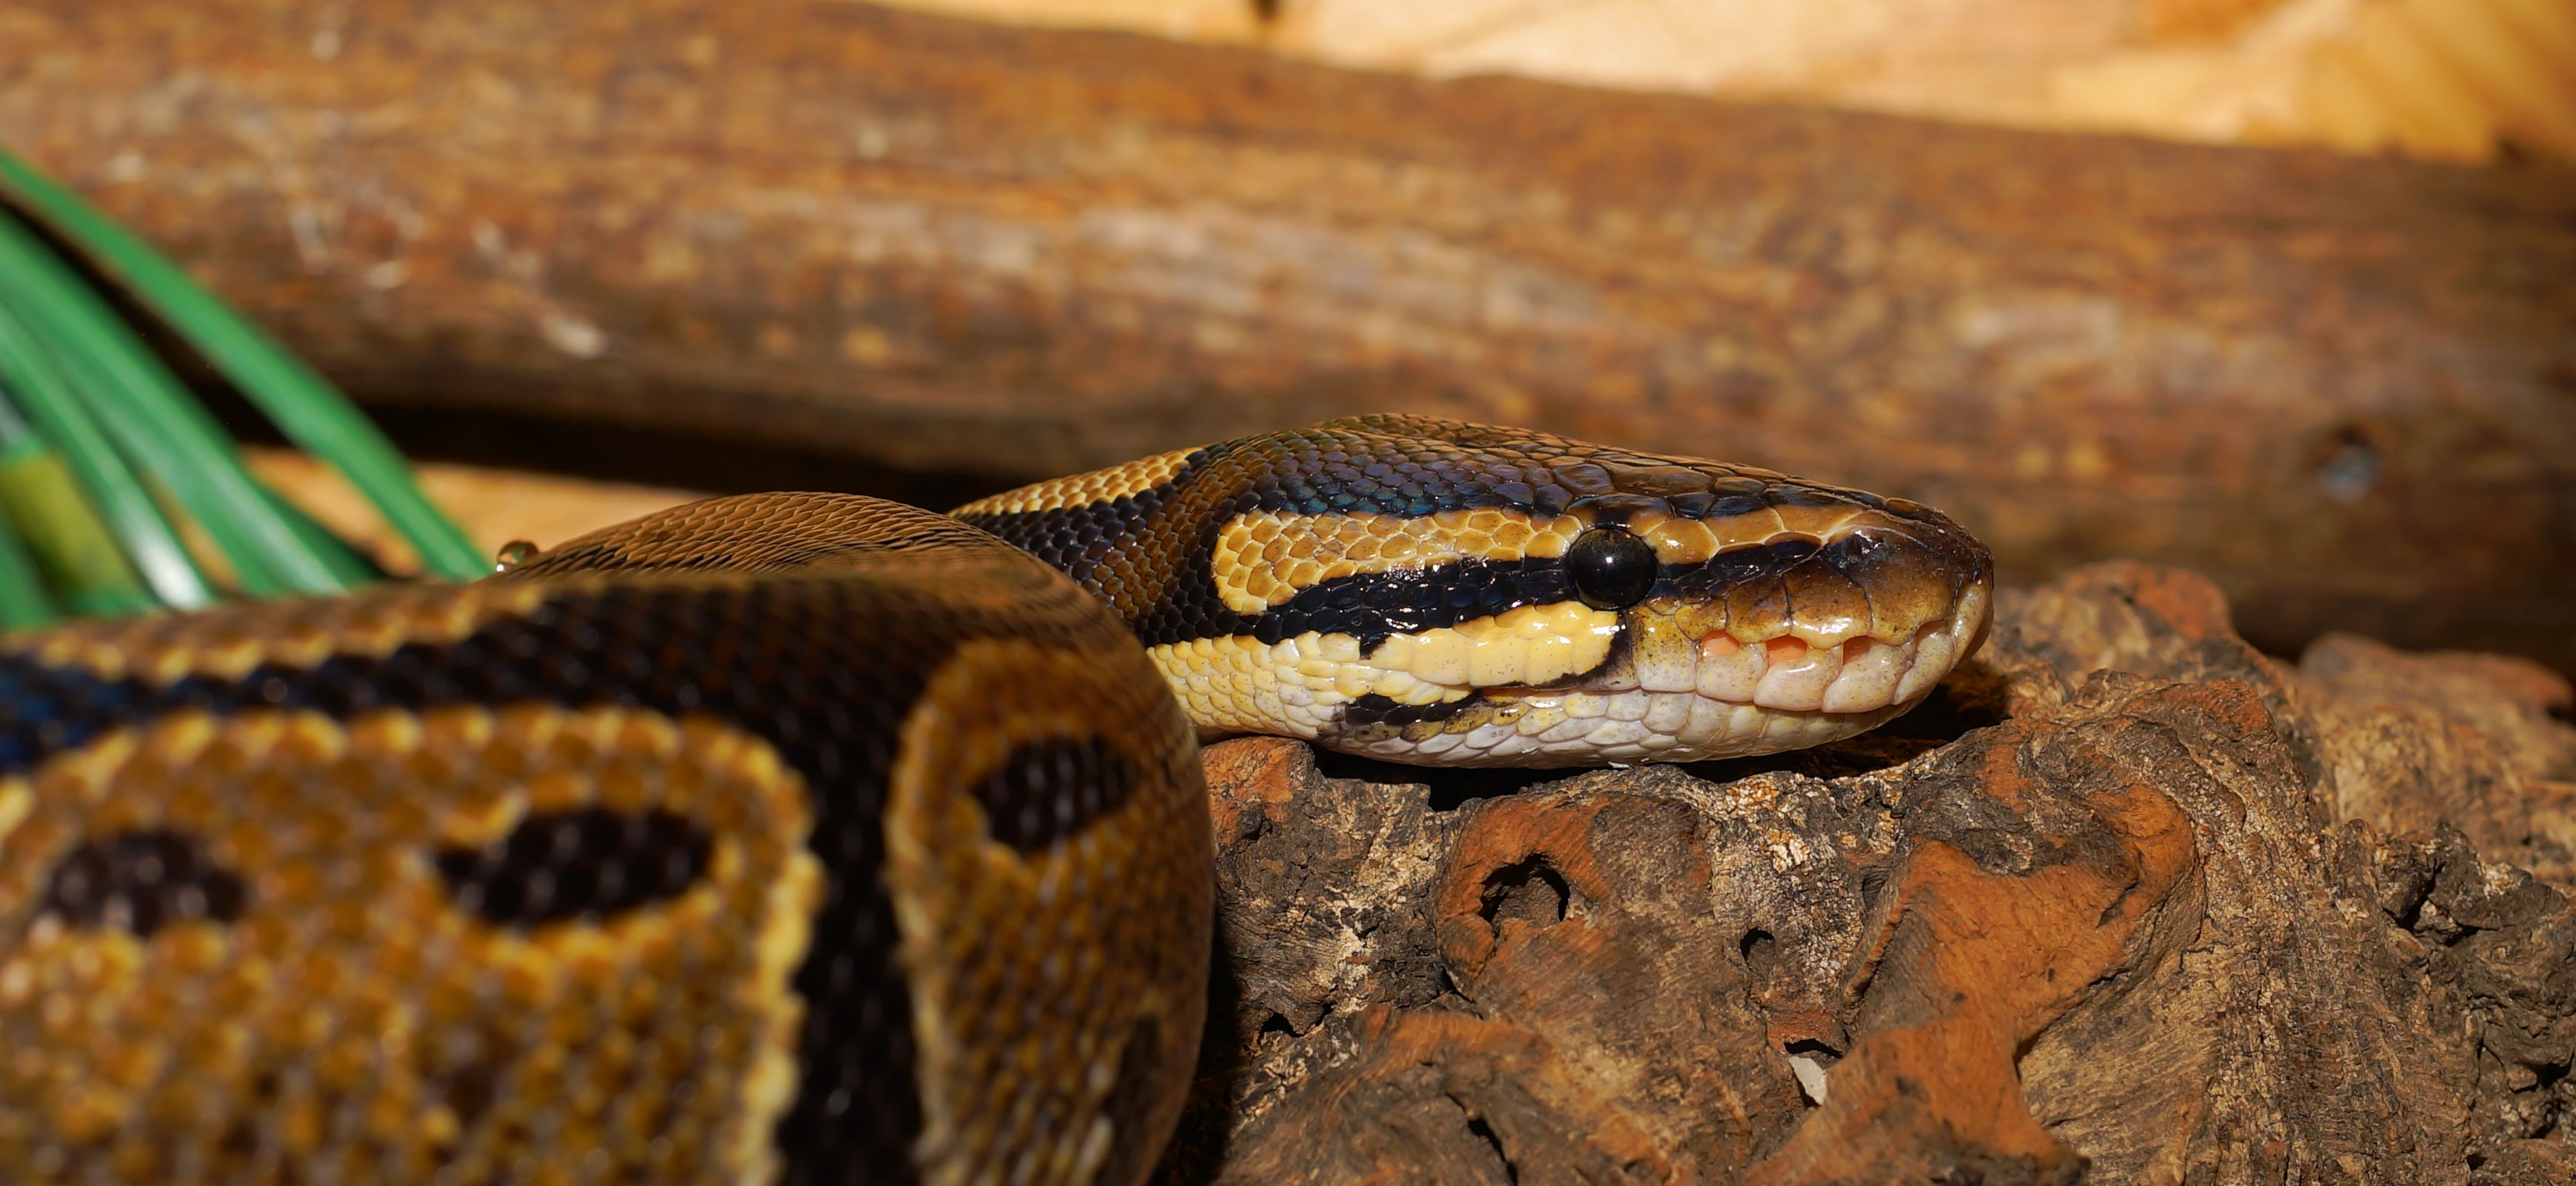 The ball python, also known as the Royal Python by Karsten Paulick